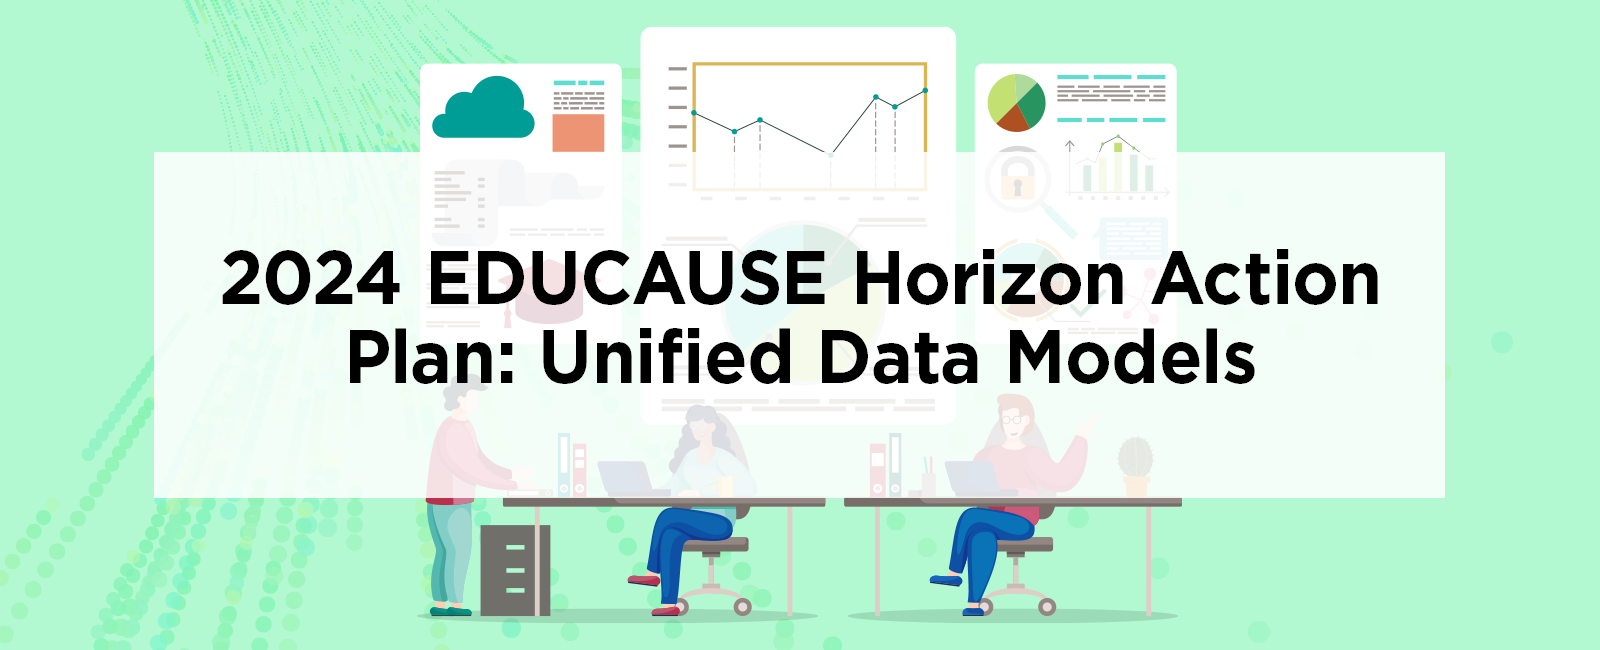 2024 EDUCAUSE Horizon Action Plan: Unified Data Models with illustrations of humans at workspaces and charts depicting data